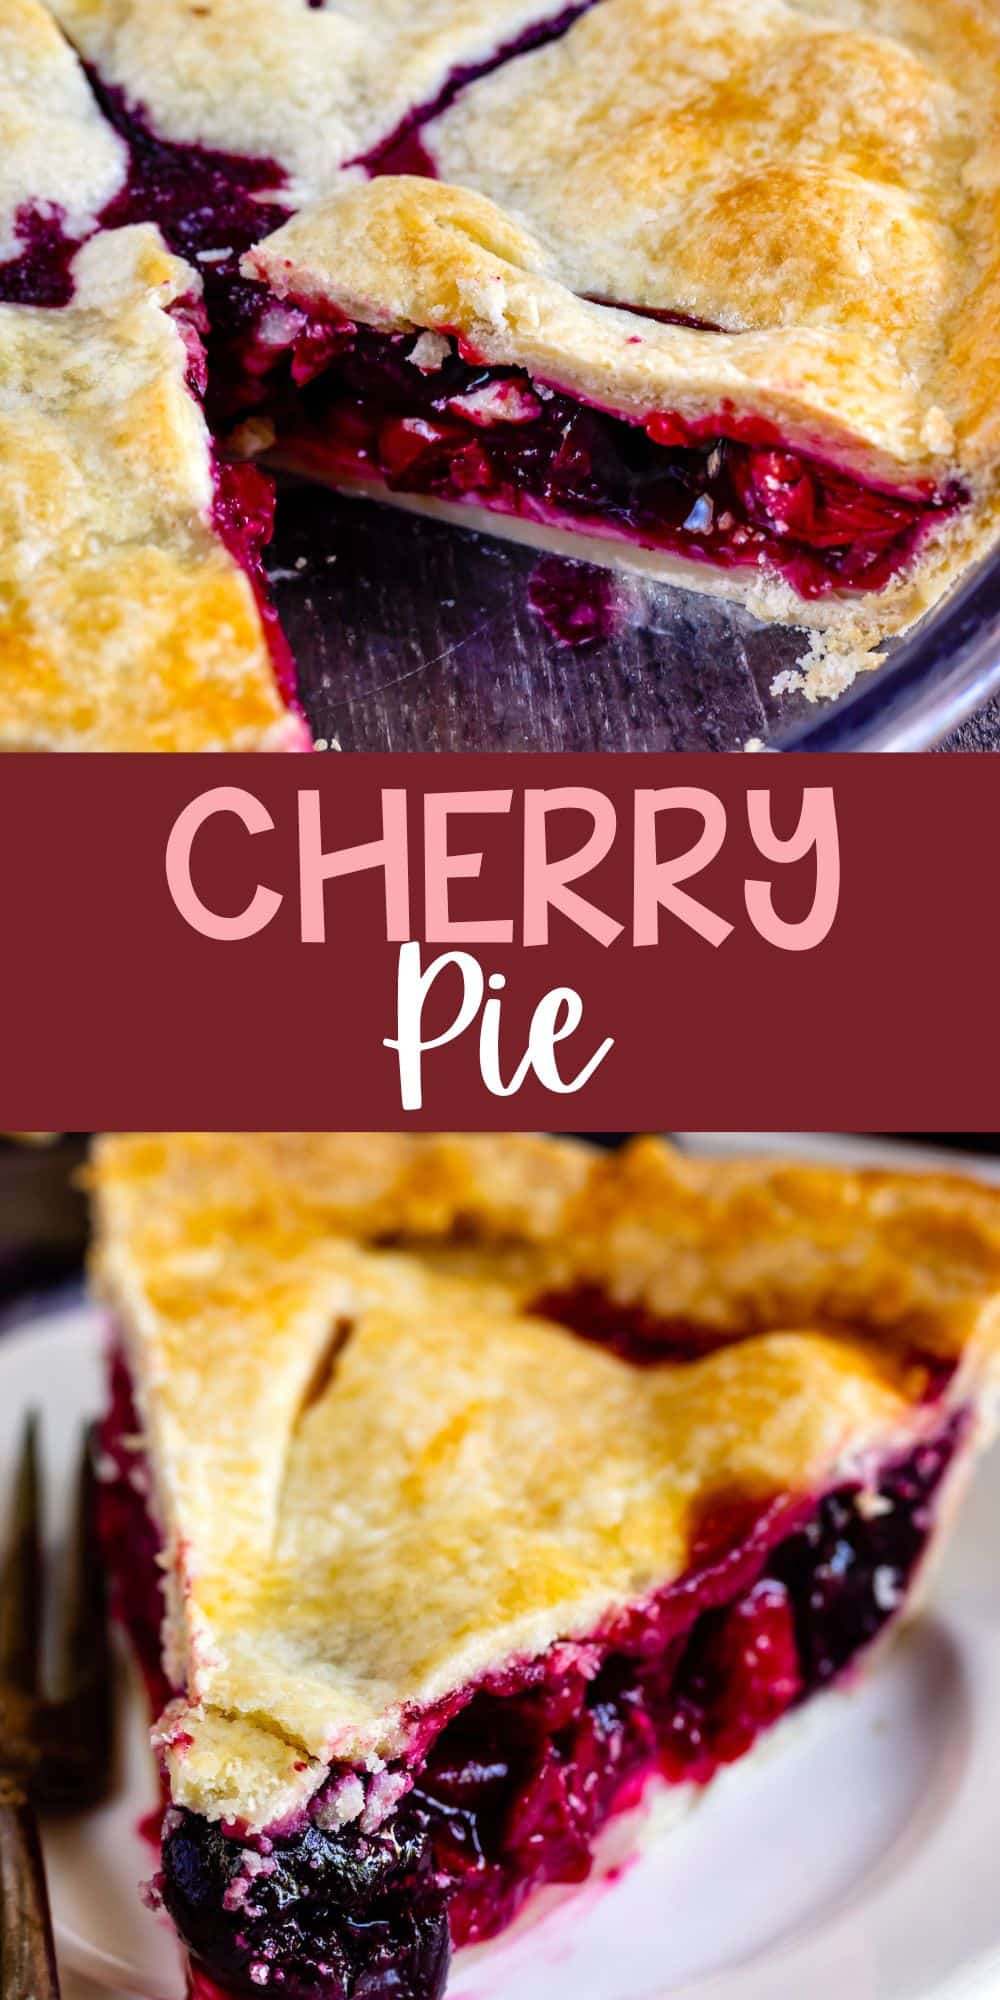 two photos of cherry pie with cherry pie filling in the crust with words on the image.